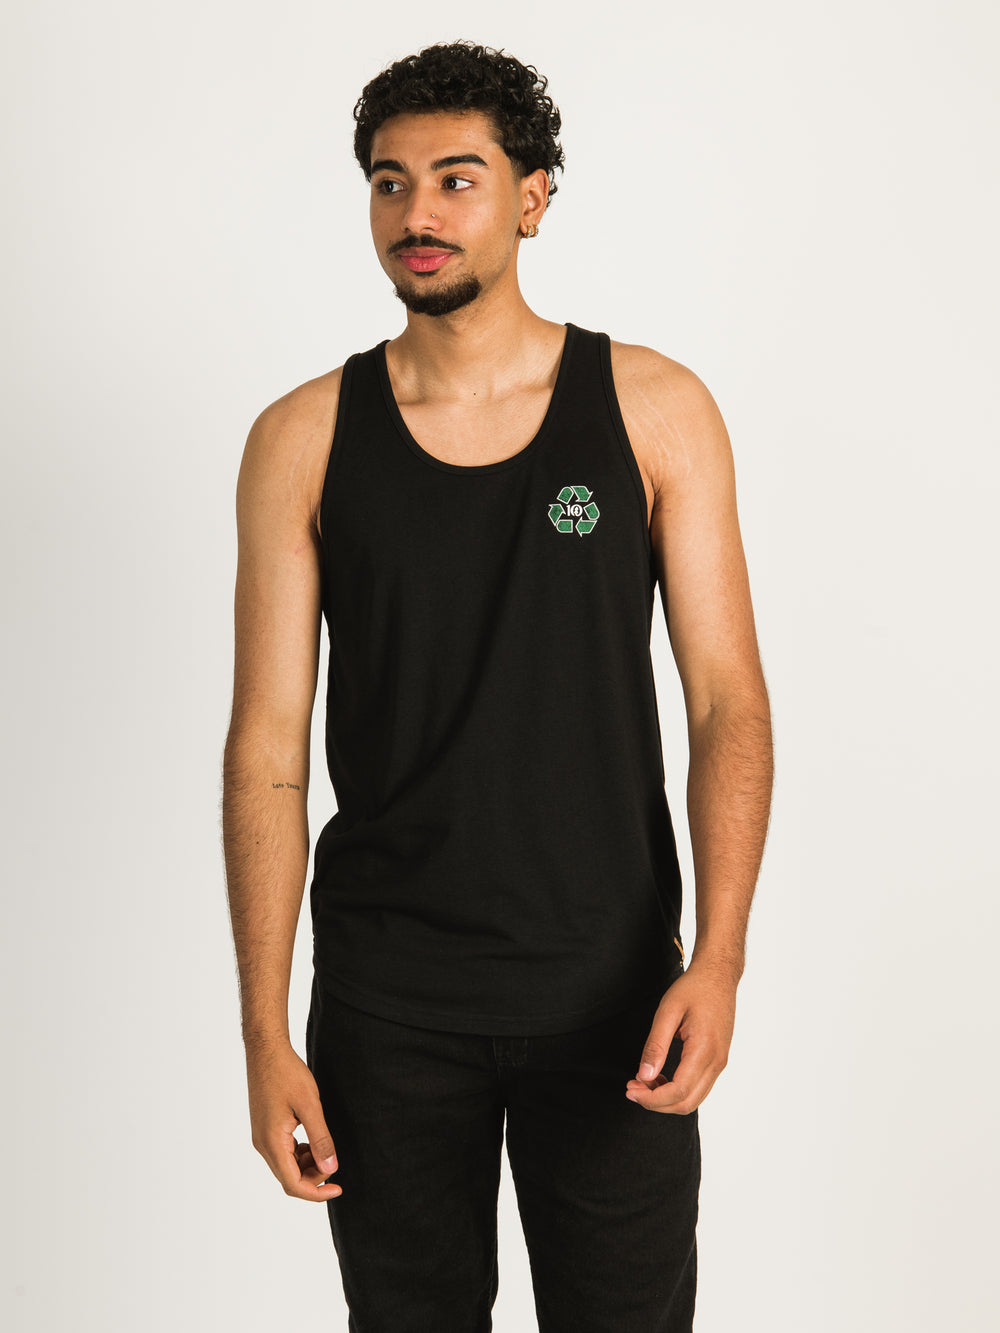 TENTREE RECYCLE TANK TOP